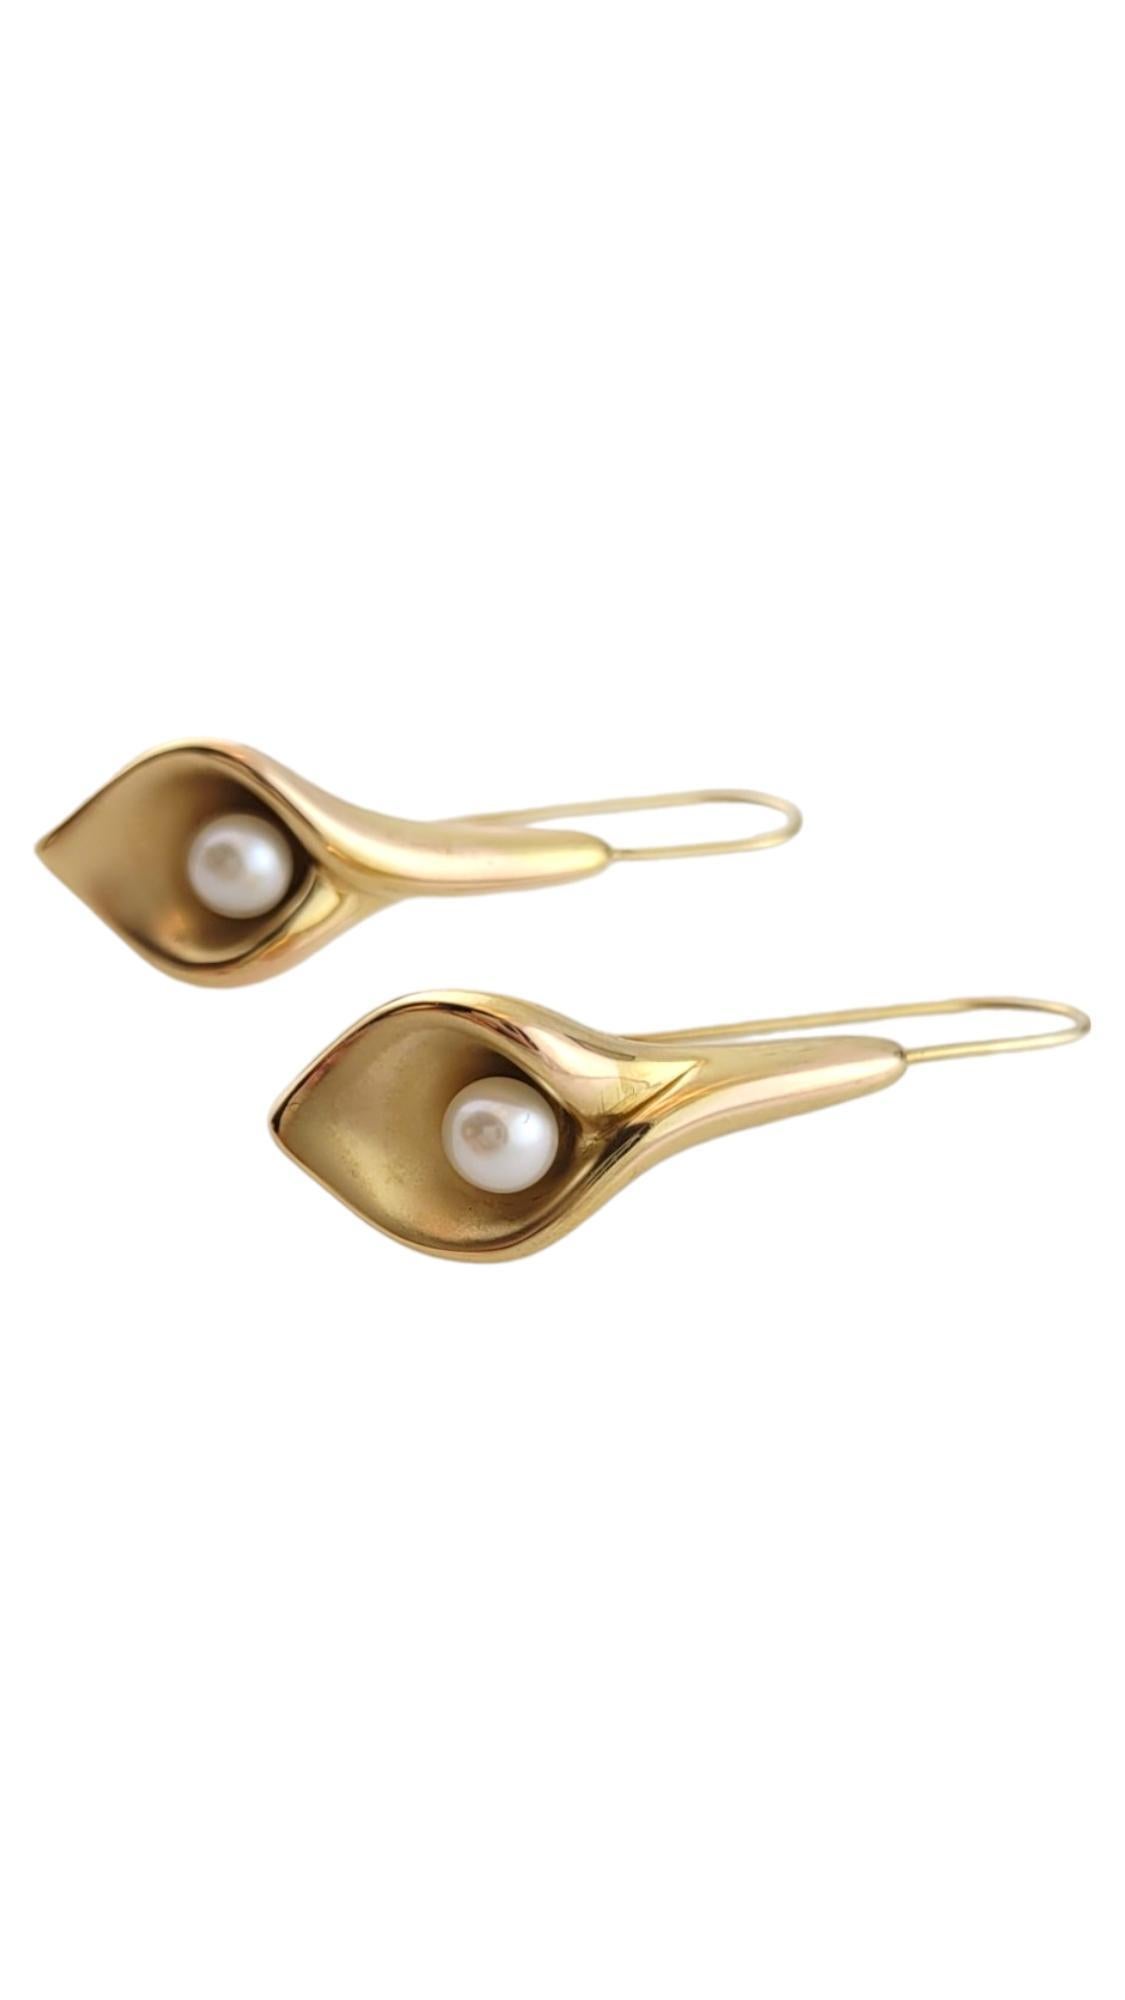 Vintage 14K Yellow Gold Pearl Drop Earrings

This breathtaking set of drop earrings in the shape of calla lilies are made from 14K yellow gold and feature 2 beautiful pearls!

Pearl size: 4.43mm each

Size: 35.35mm X 10.85mm X 6.05mm

Weight: 1.4